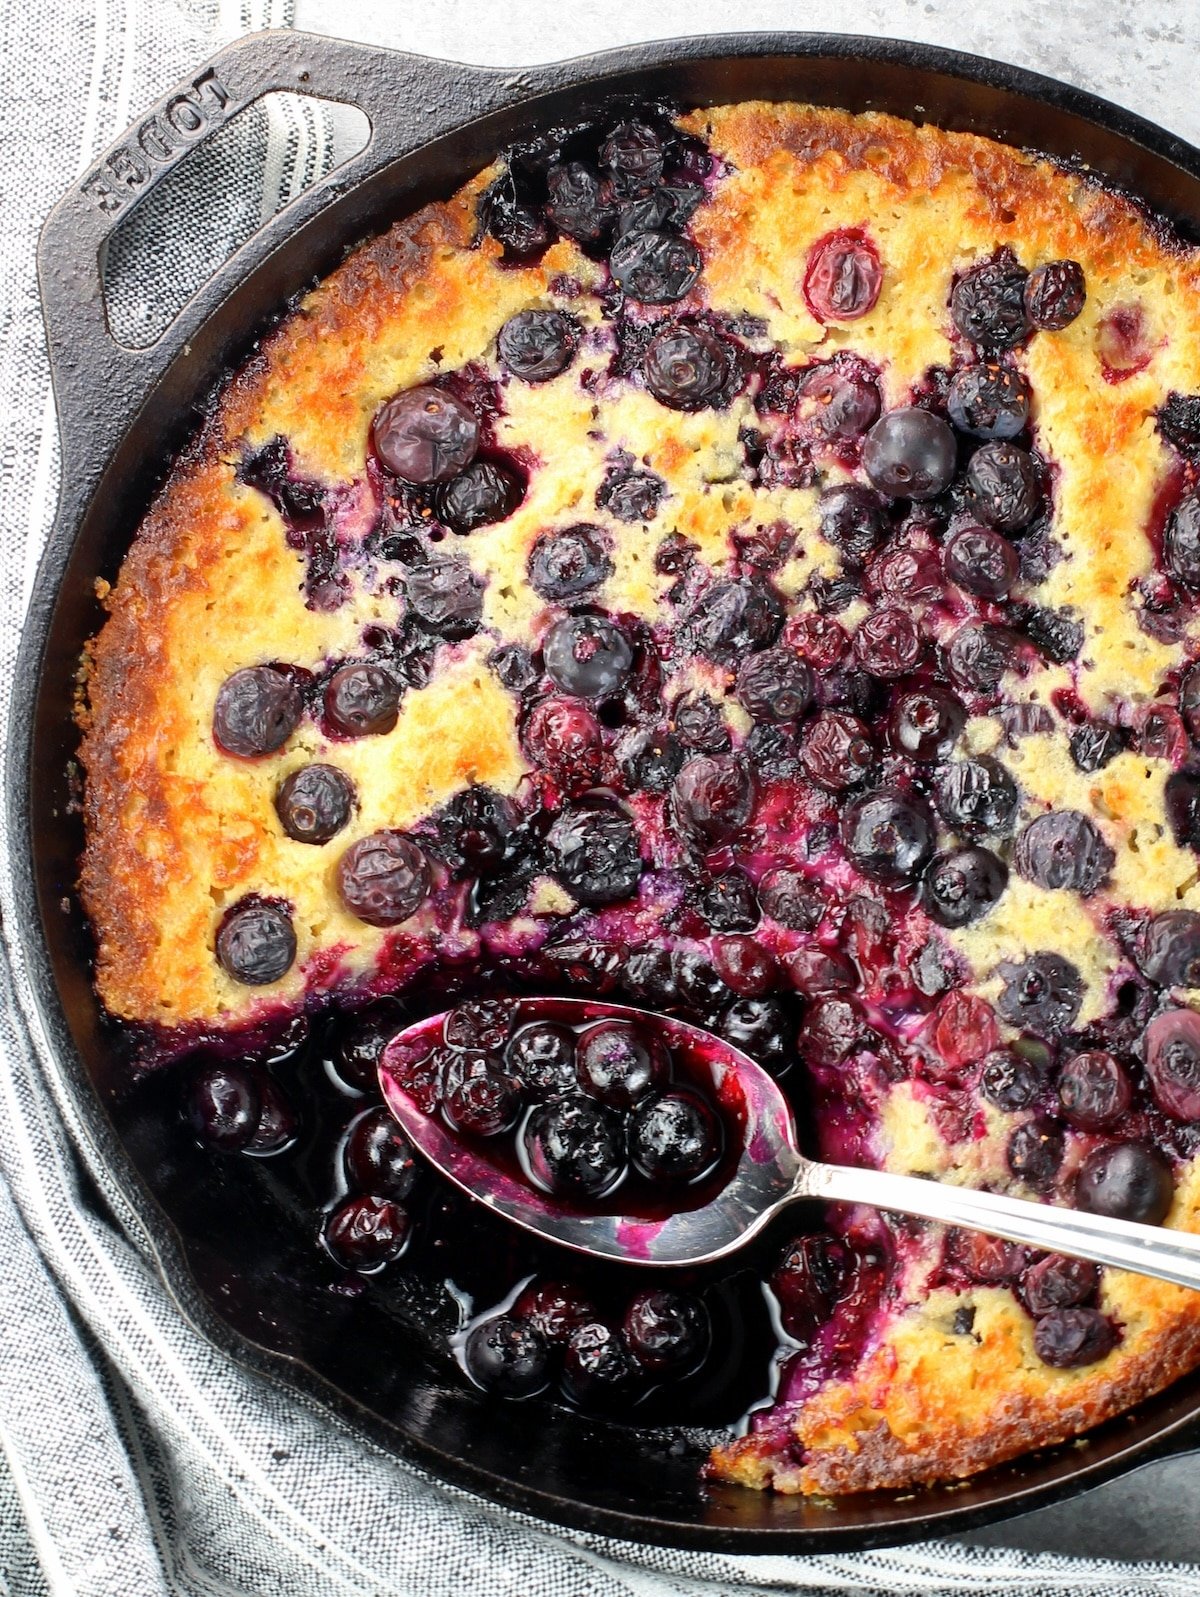 A photo of half a pan of baked blueberry cobbler.